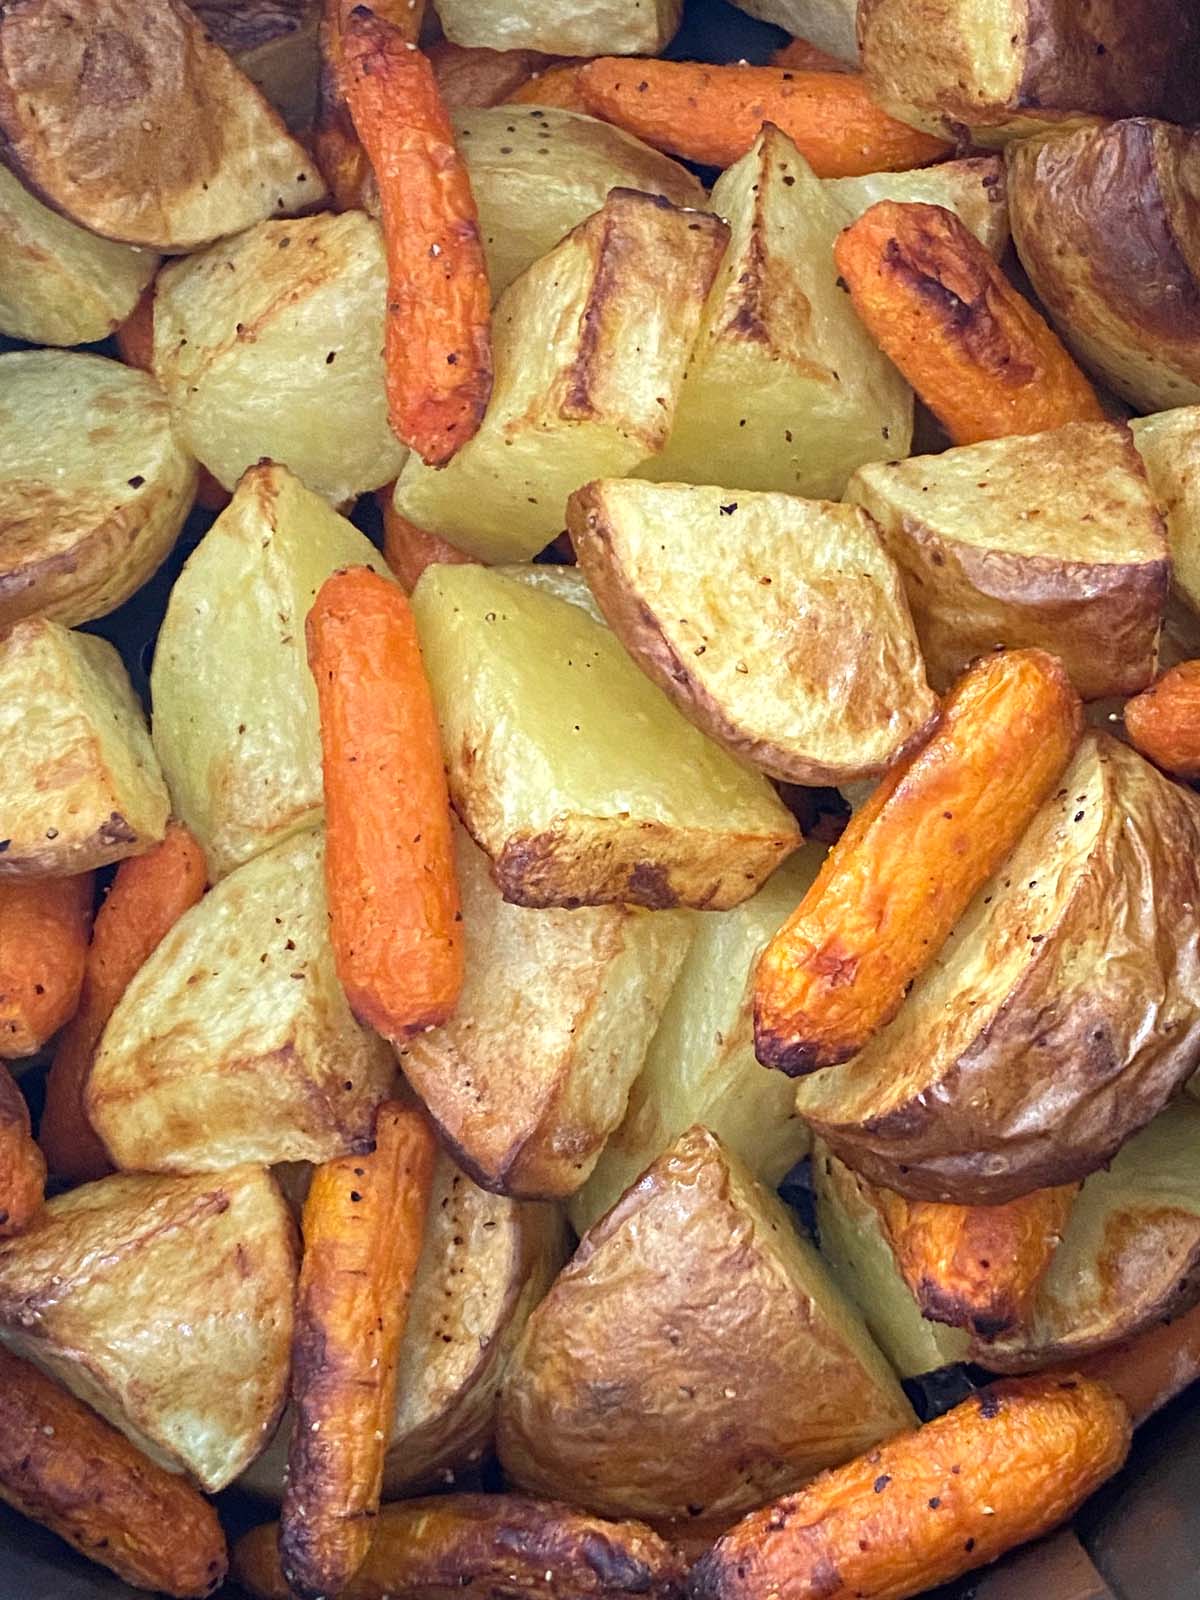 Roasted potatoes and carrots.